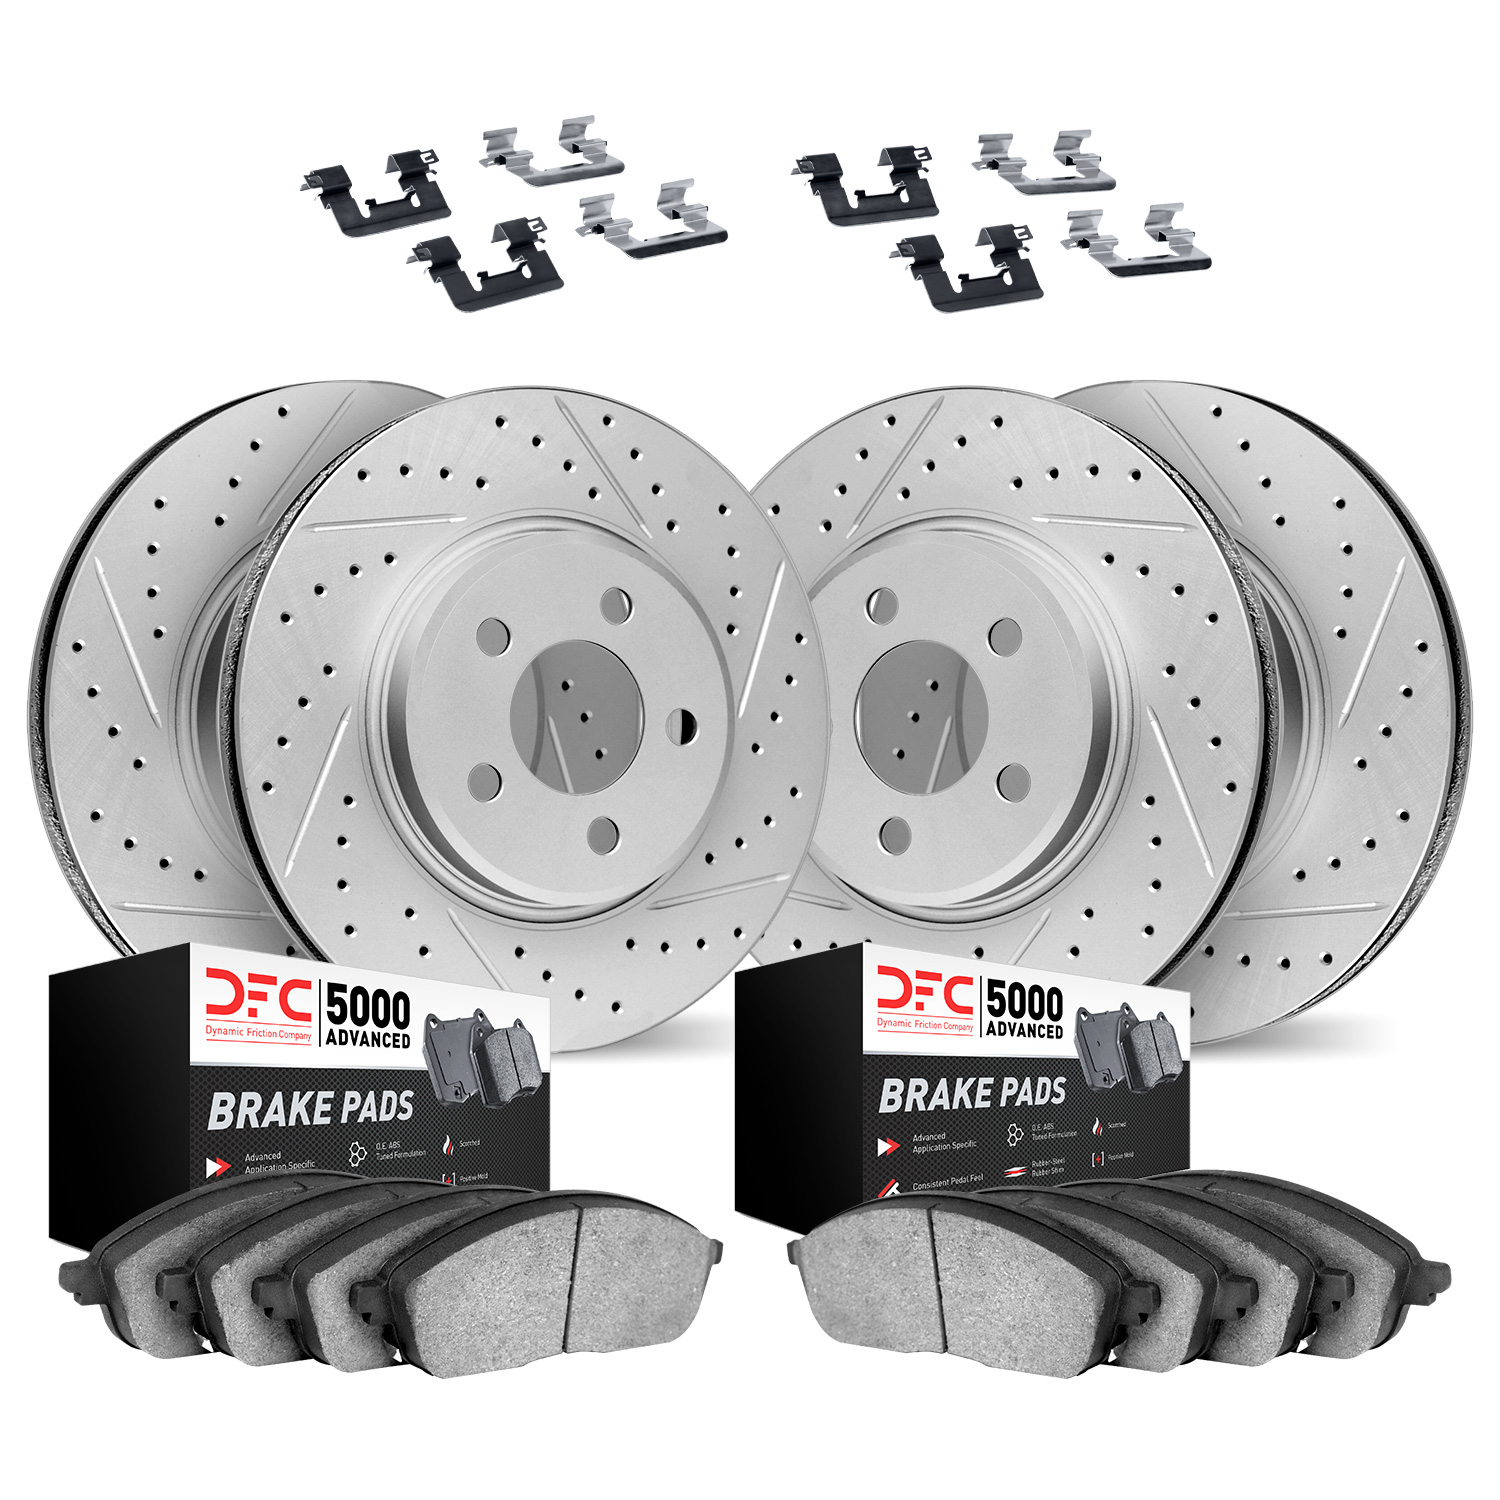 2514-31070 Geoperformance Drilled/Slotted Rotors w/5000 Advanced Brake Pads Kit & Hardware, 2014-2019 BMW, Position: Front and R